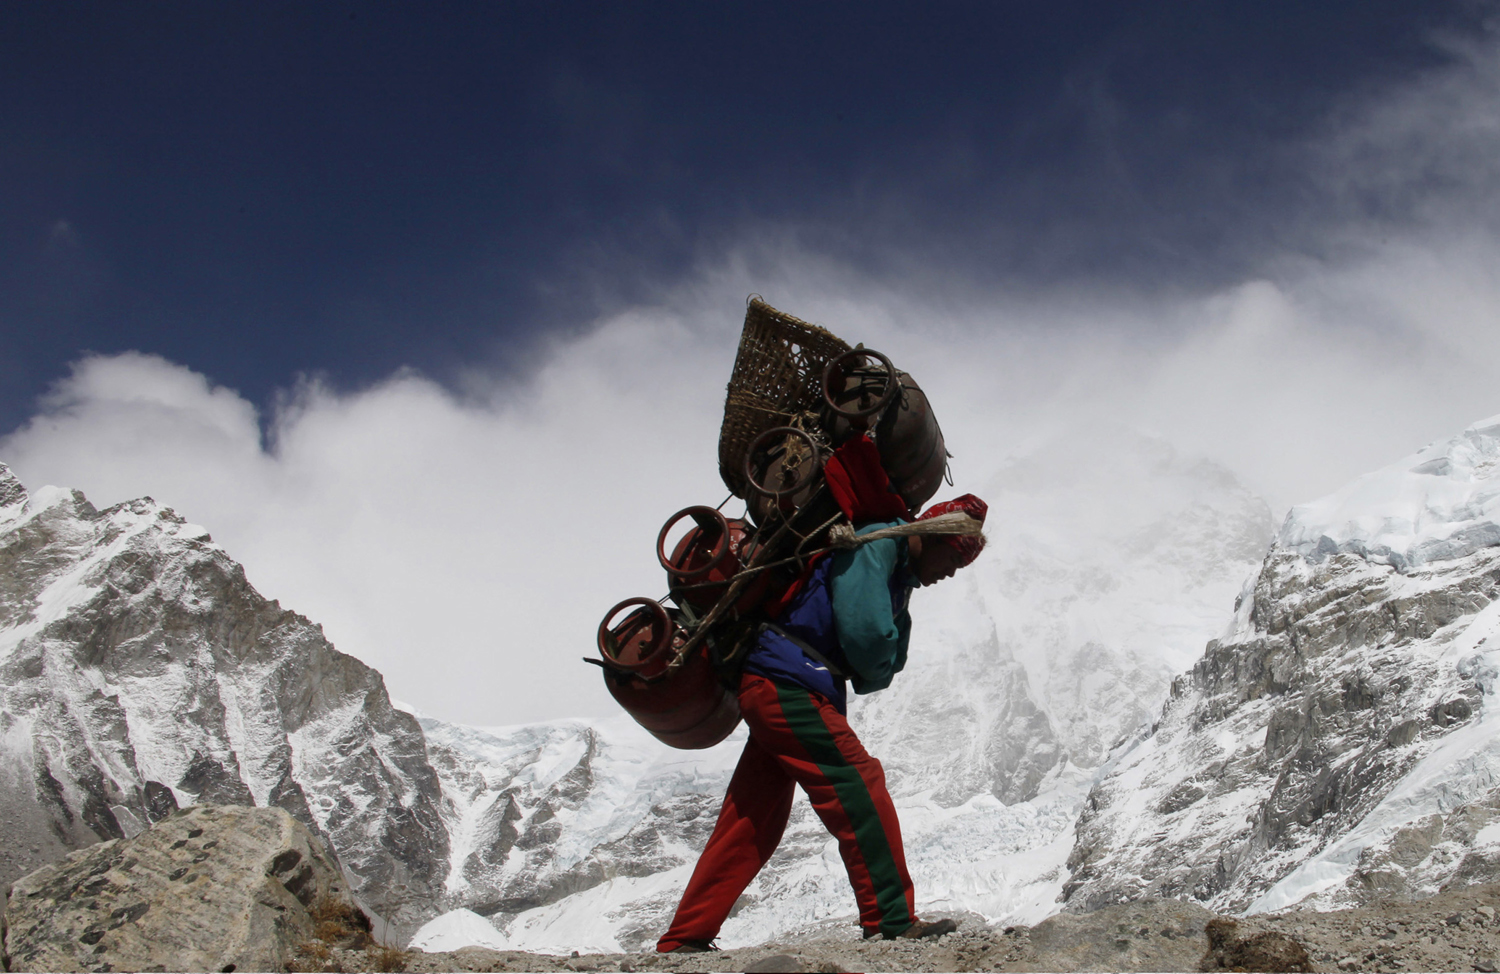 A Nepalese porter walks with his load from Everest base camp in Nepal